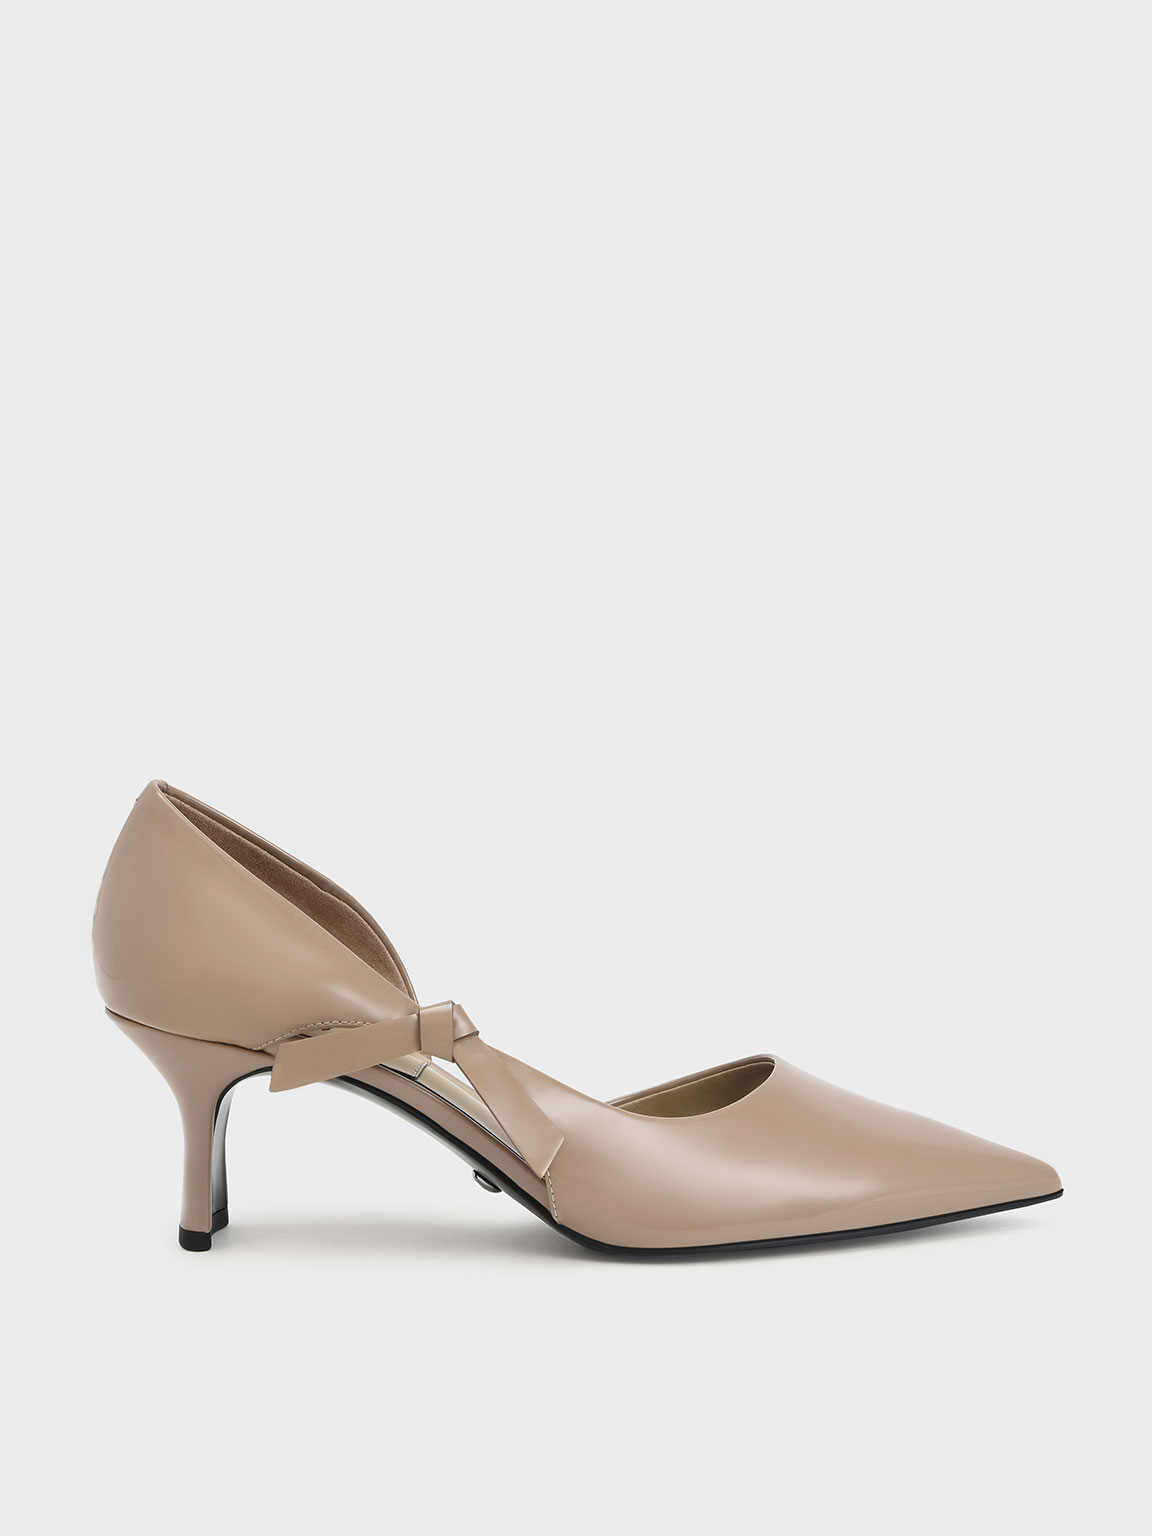 Taupe Patent Leather Bow-Tie Half D'Orsay Pumps - CHARLES & KEITH ID